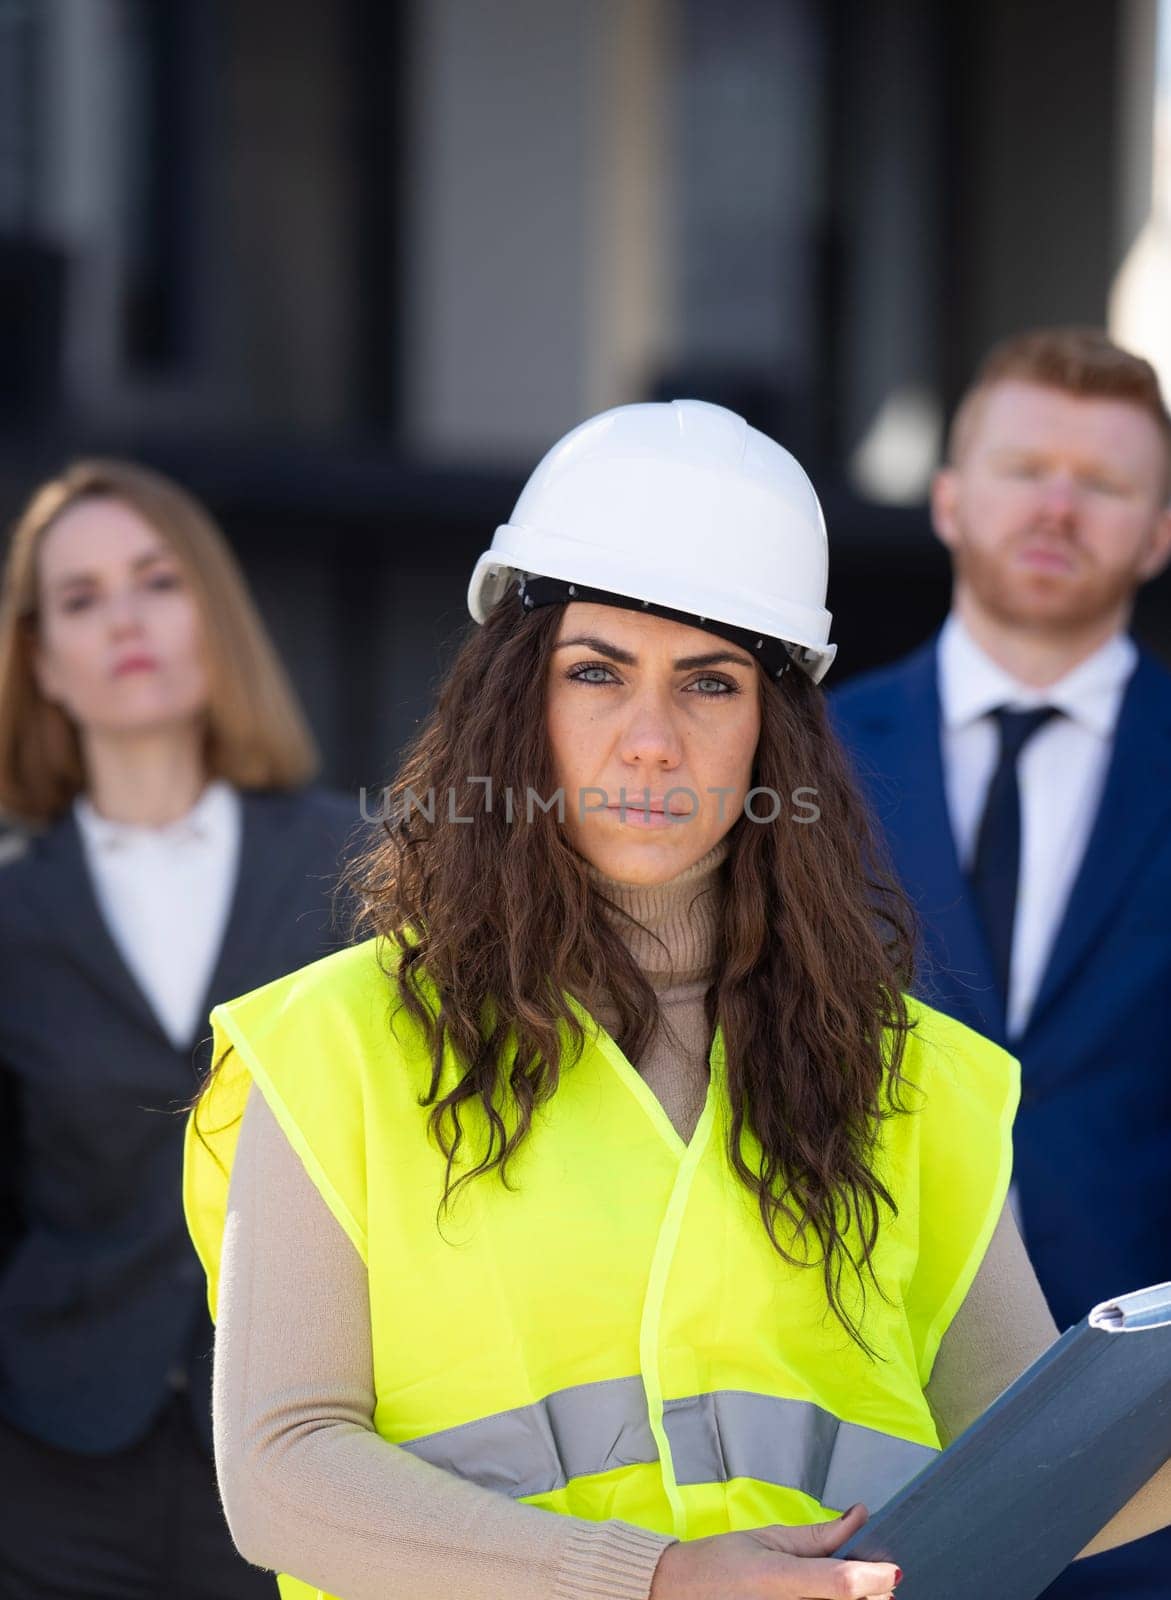 Woman engineering manager is leading a construction in front of their business team.